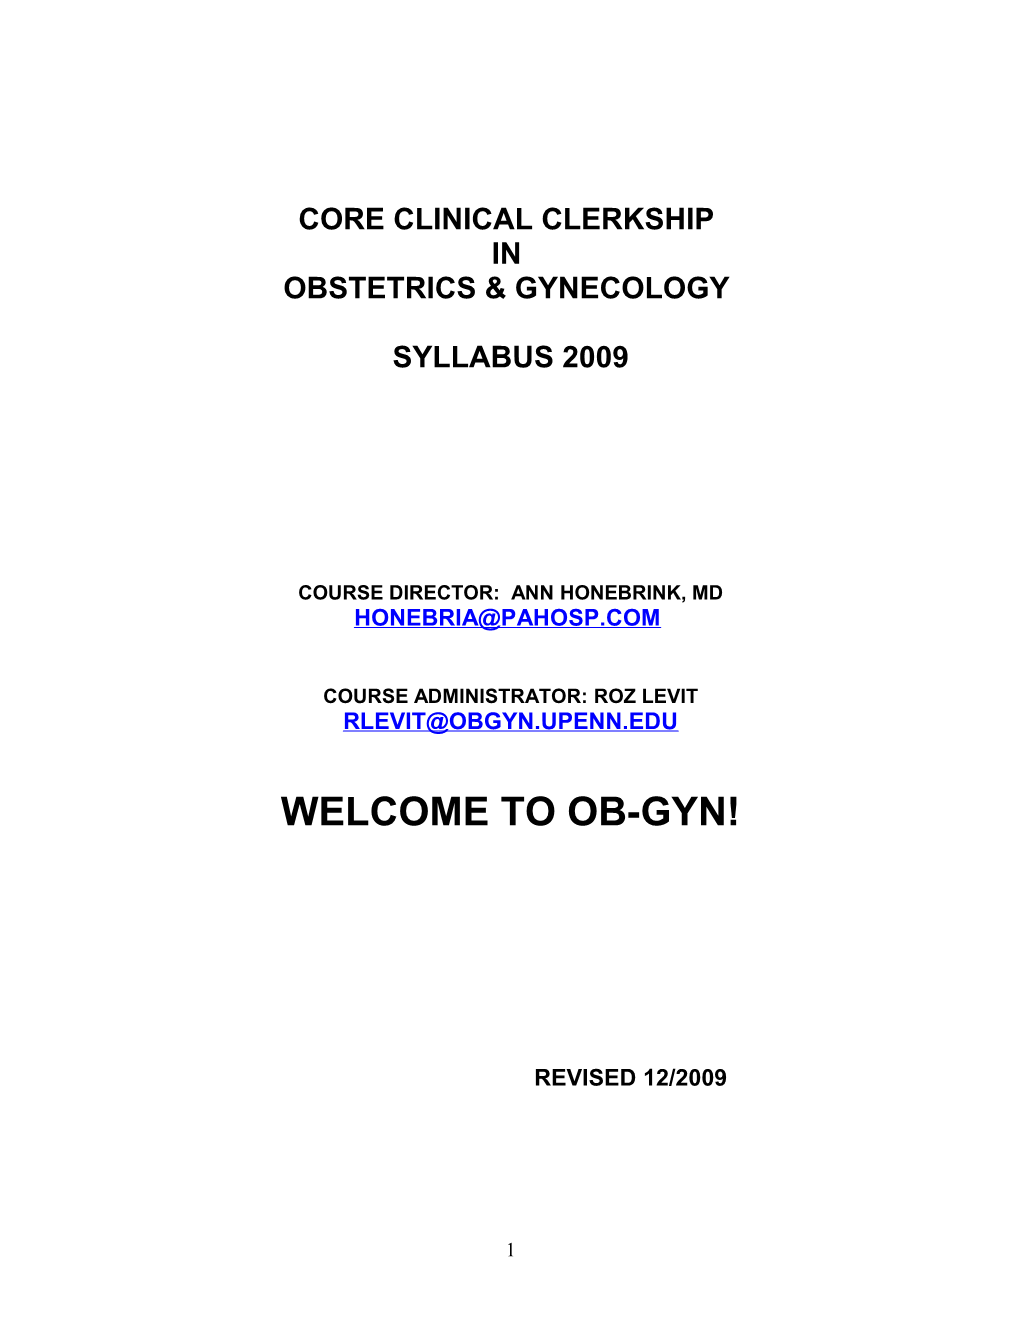 Core Clinical Clerkship